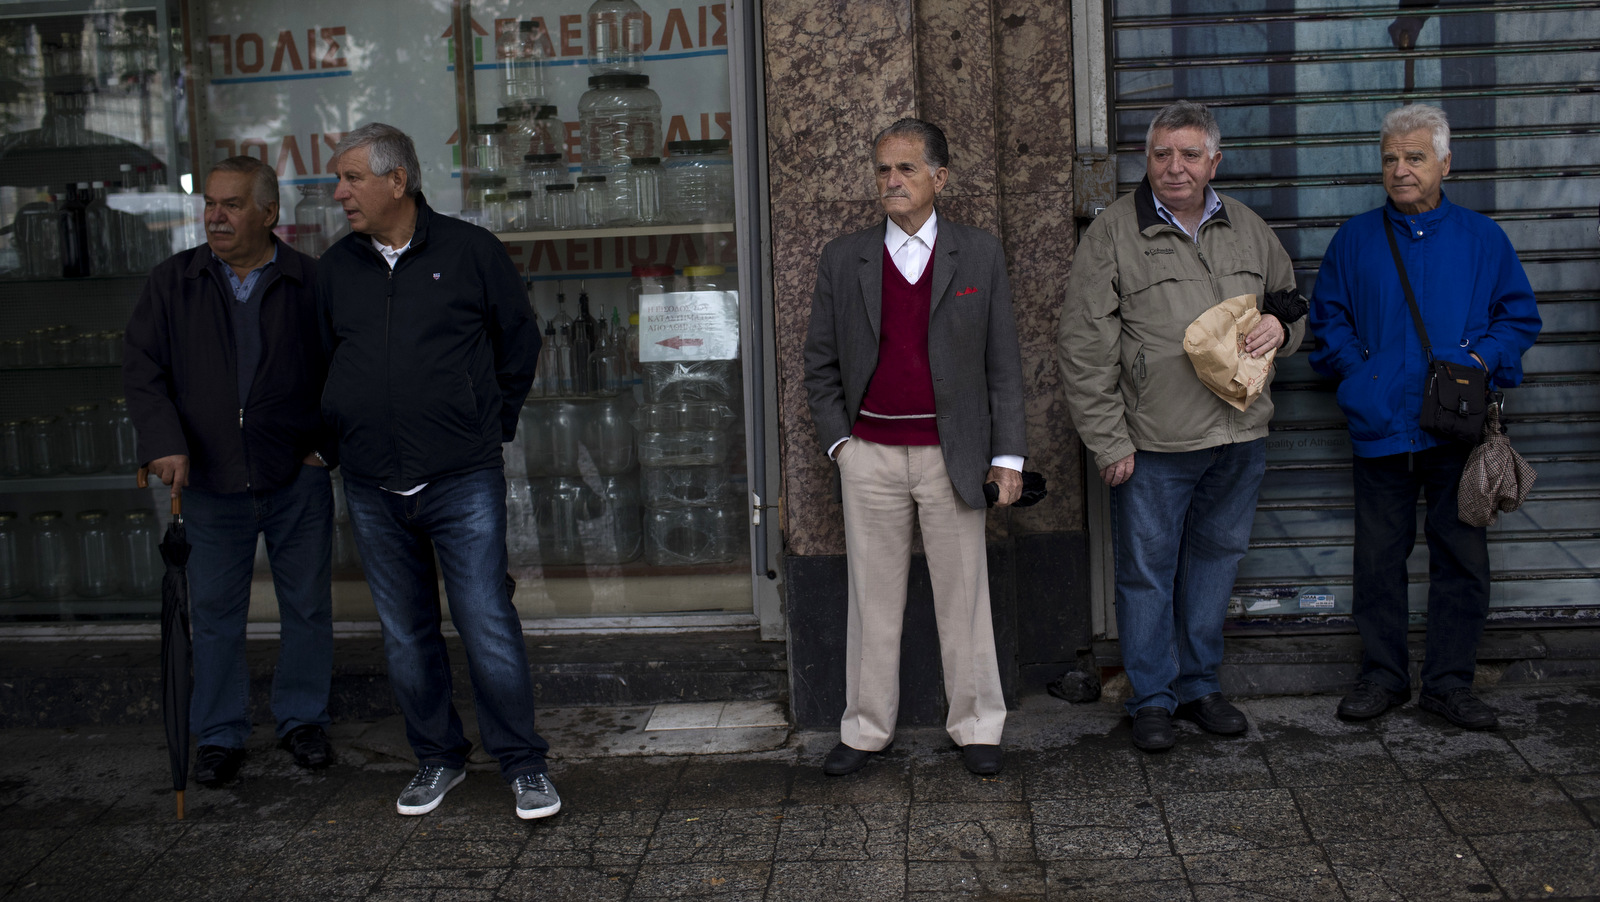 Greek pensioners stand with other retirees as they gather to take part in an anti-austerity rally in Athens. Greek retirees are struggling to survive on ever dwindling pensions with repeated cuts imposed by successive governments as part of their country’s three international bailouts. (AP/Petros Giannakouris)